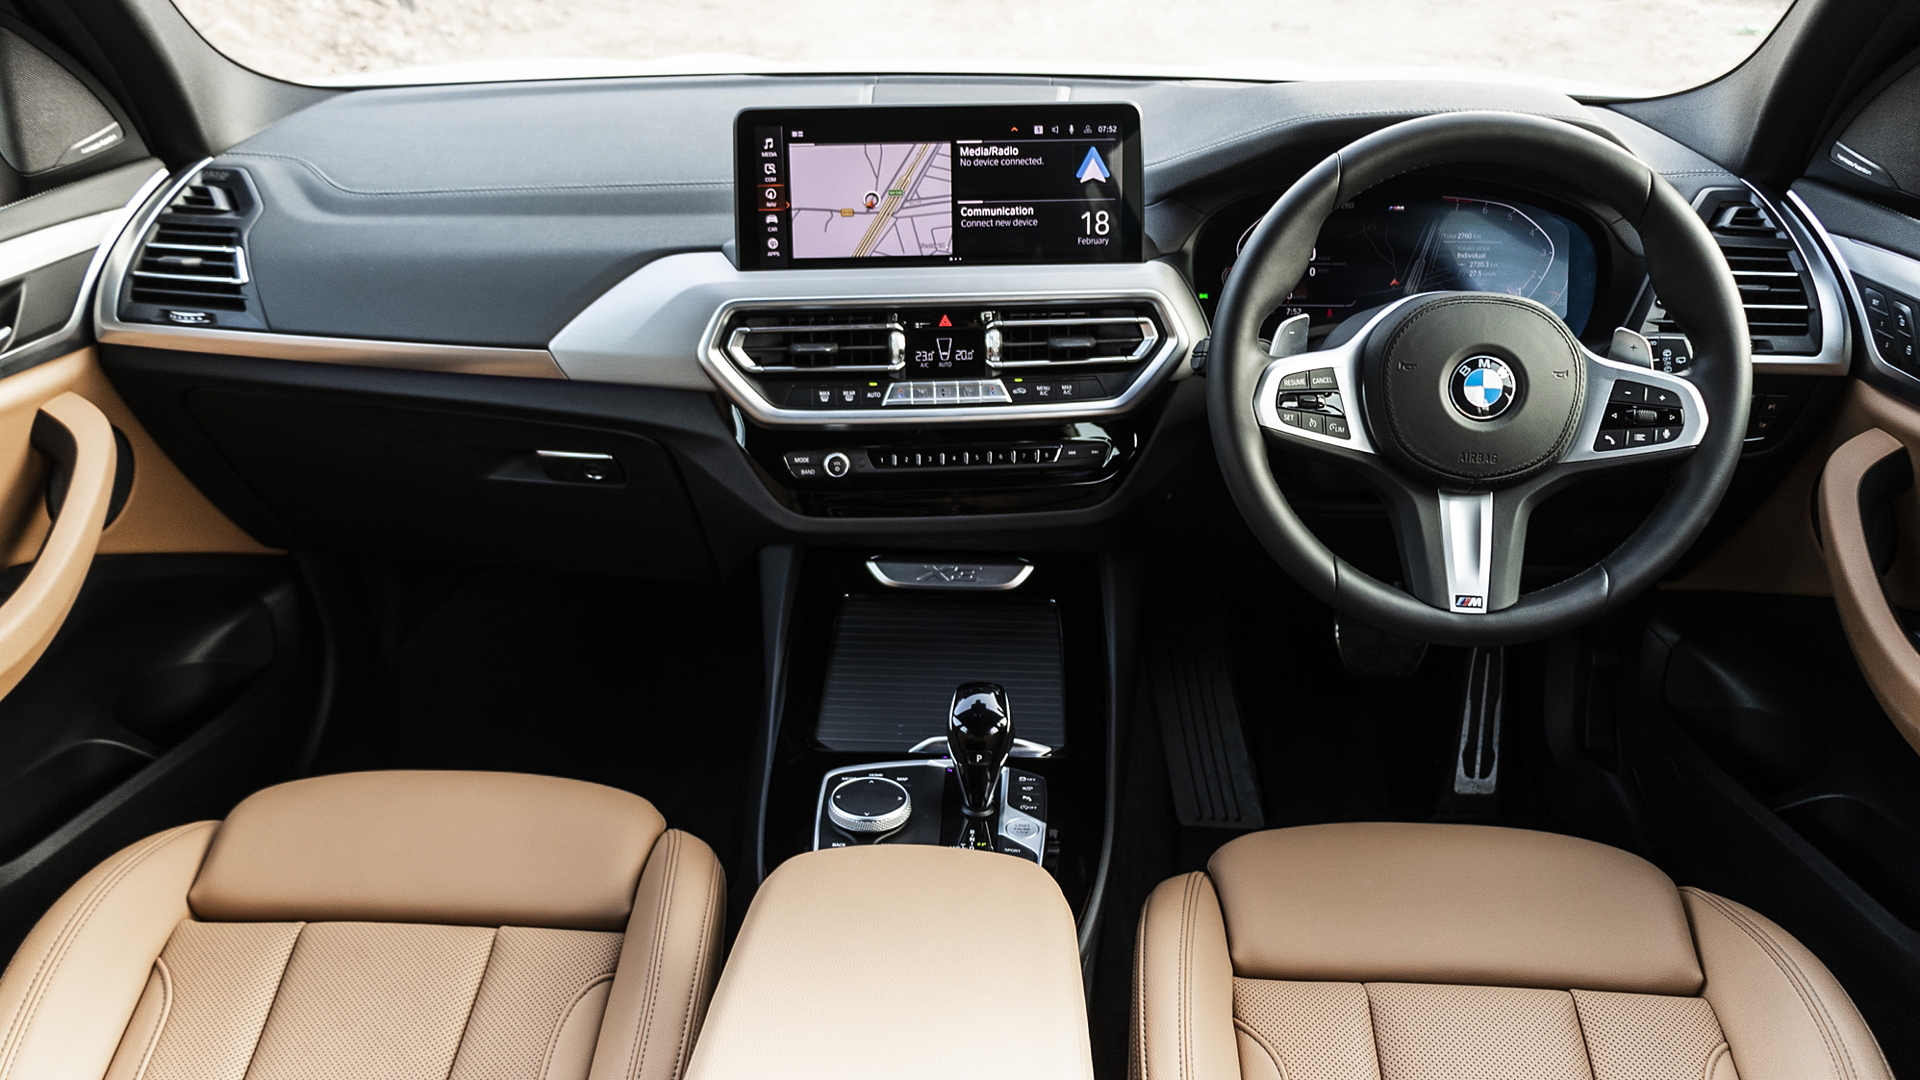 BMW X3 - Cabin and Practicality